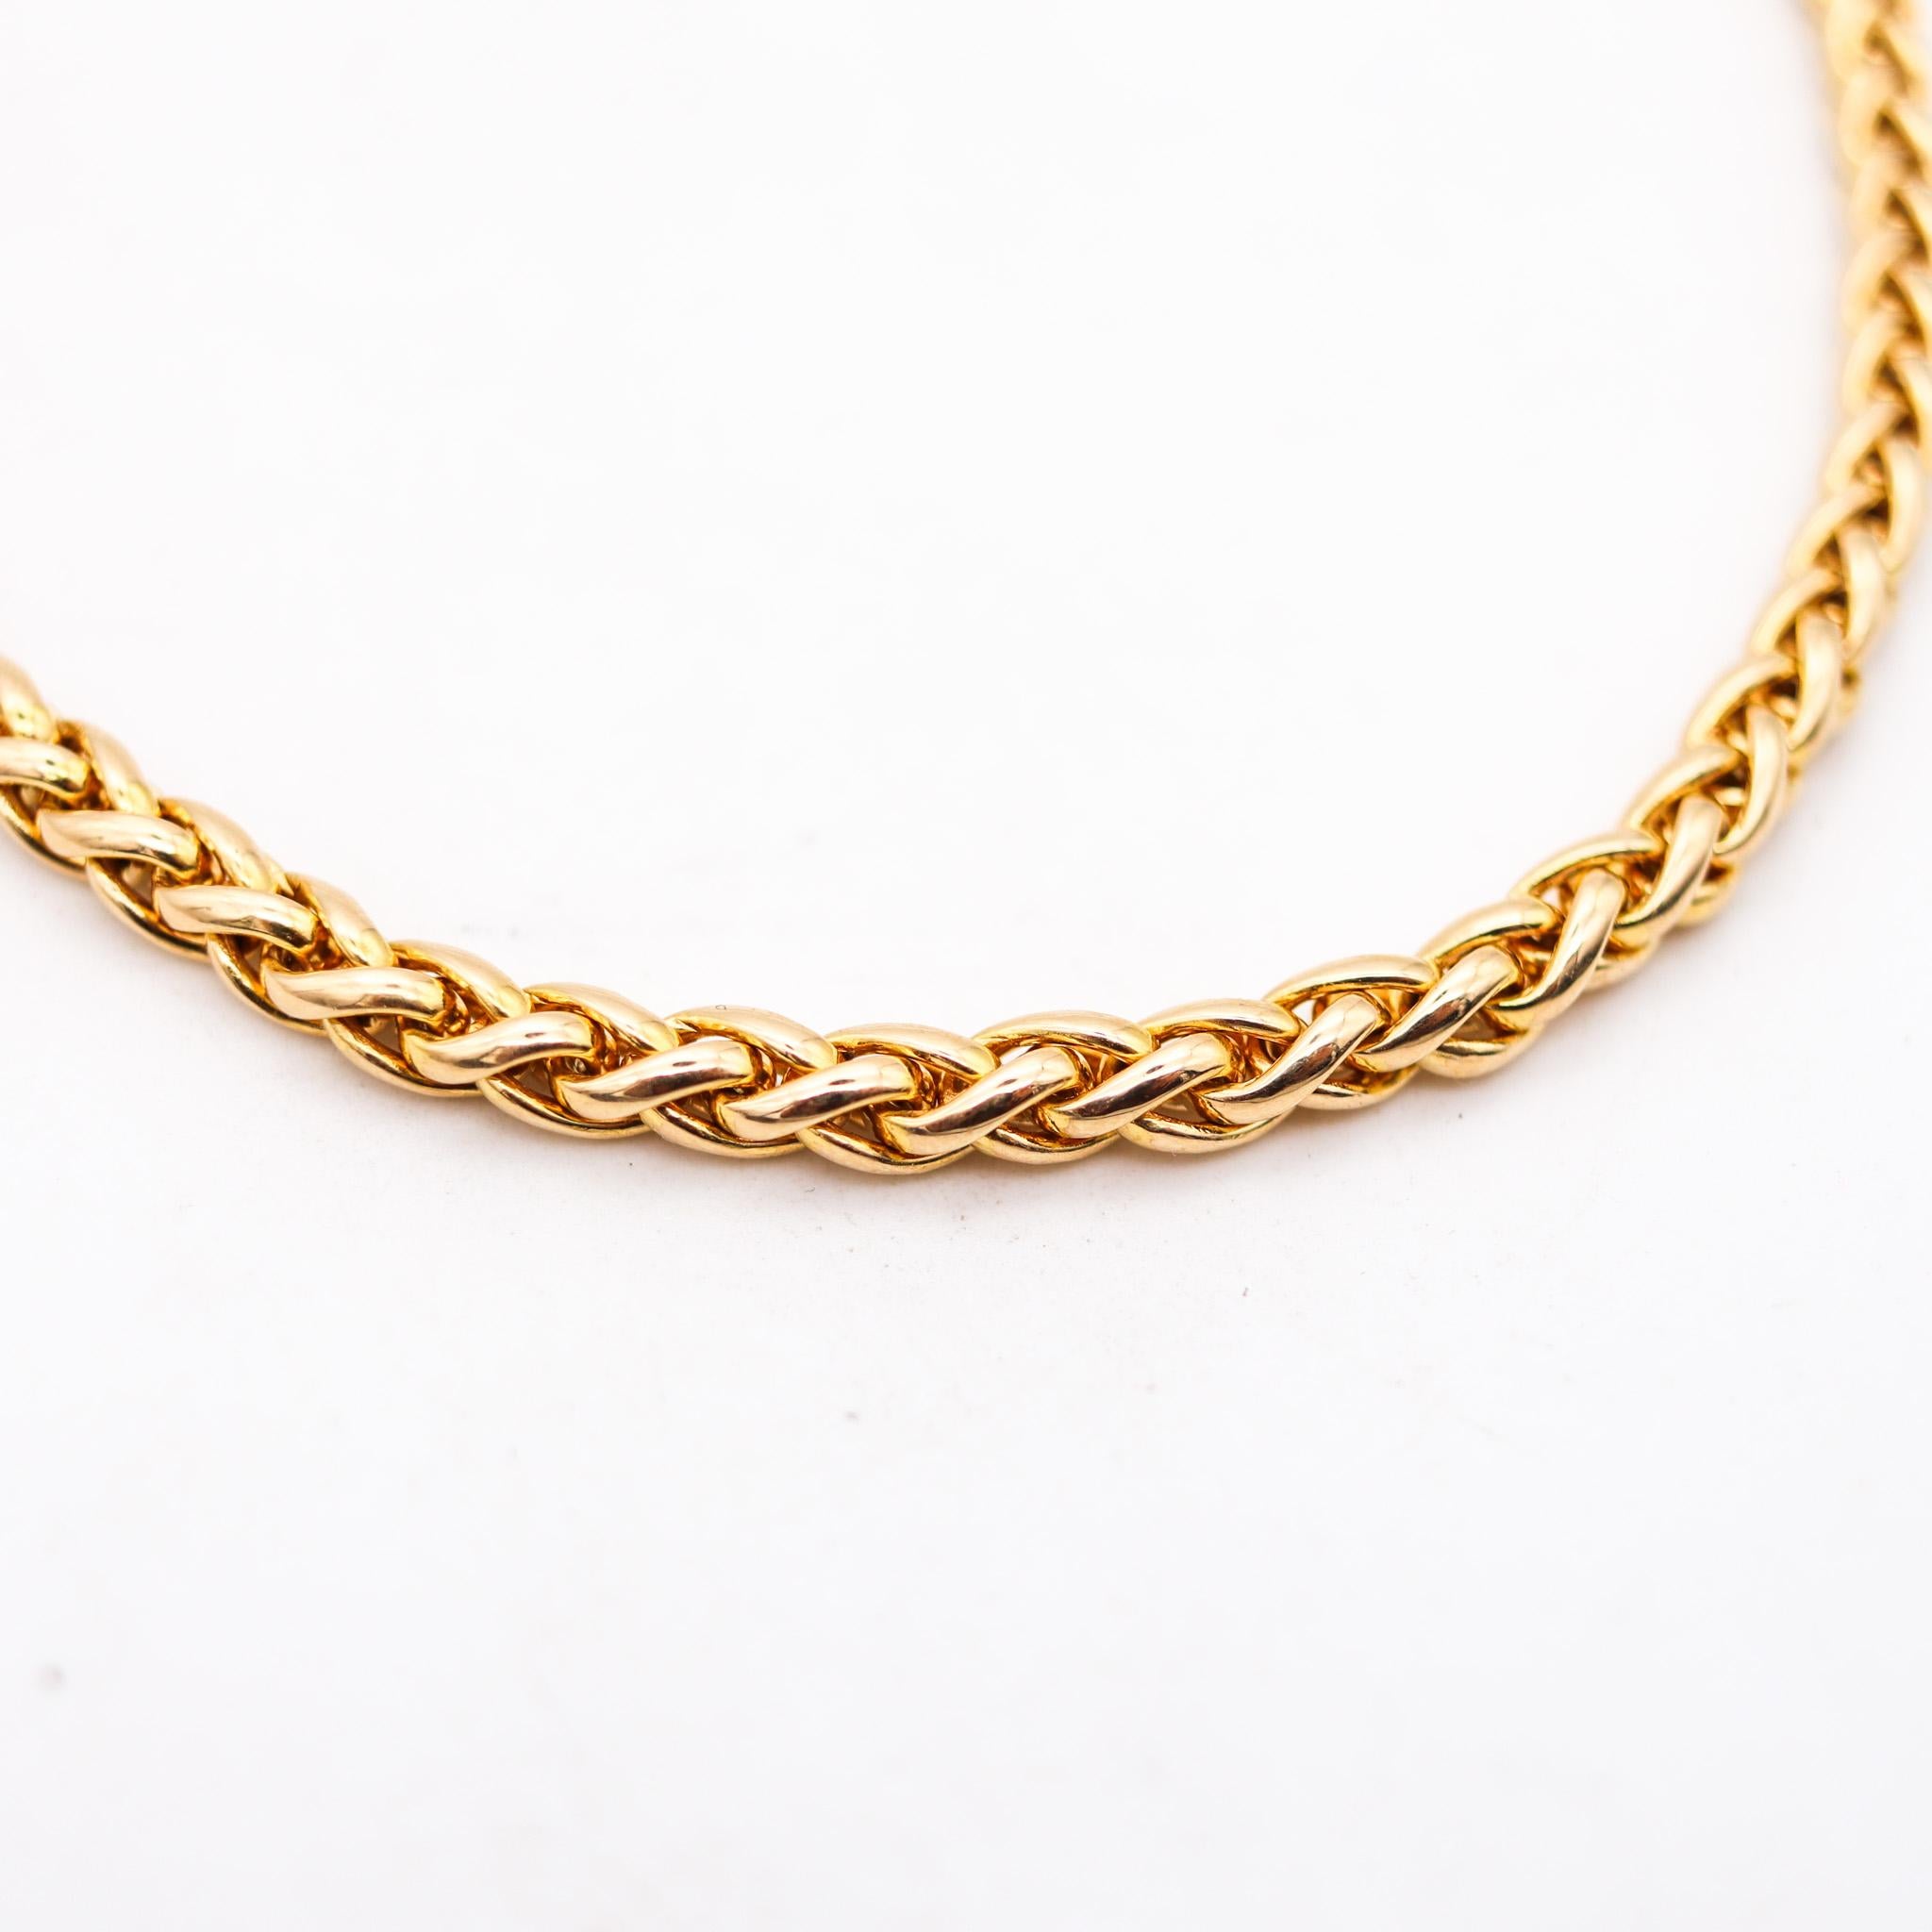 A necklace chain designed by Cartier.

Very wearable necklace chain, created in Paris France by the jewelry house of Cartier. It was crafted with intricate woven links made up of solid yellow gold of 18 karats with high polished finish. This piece